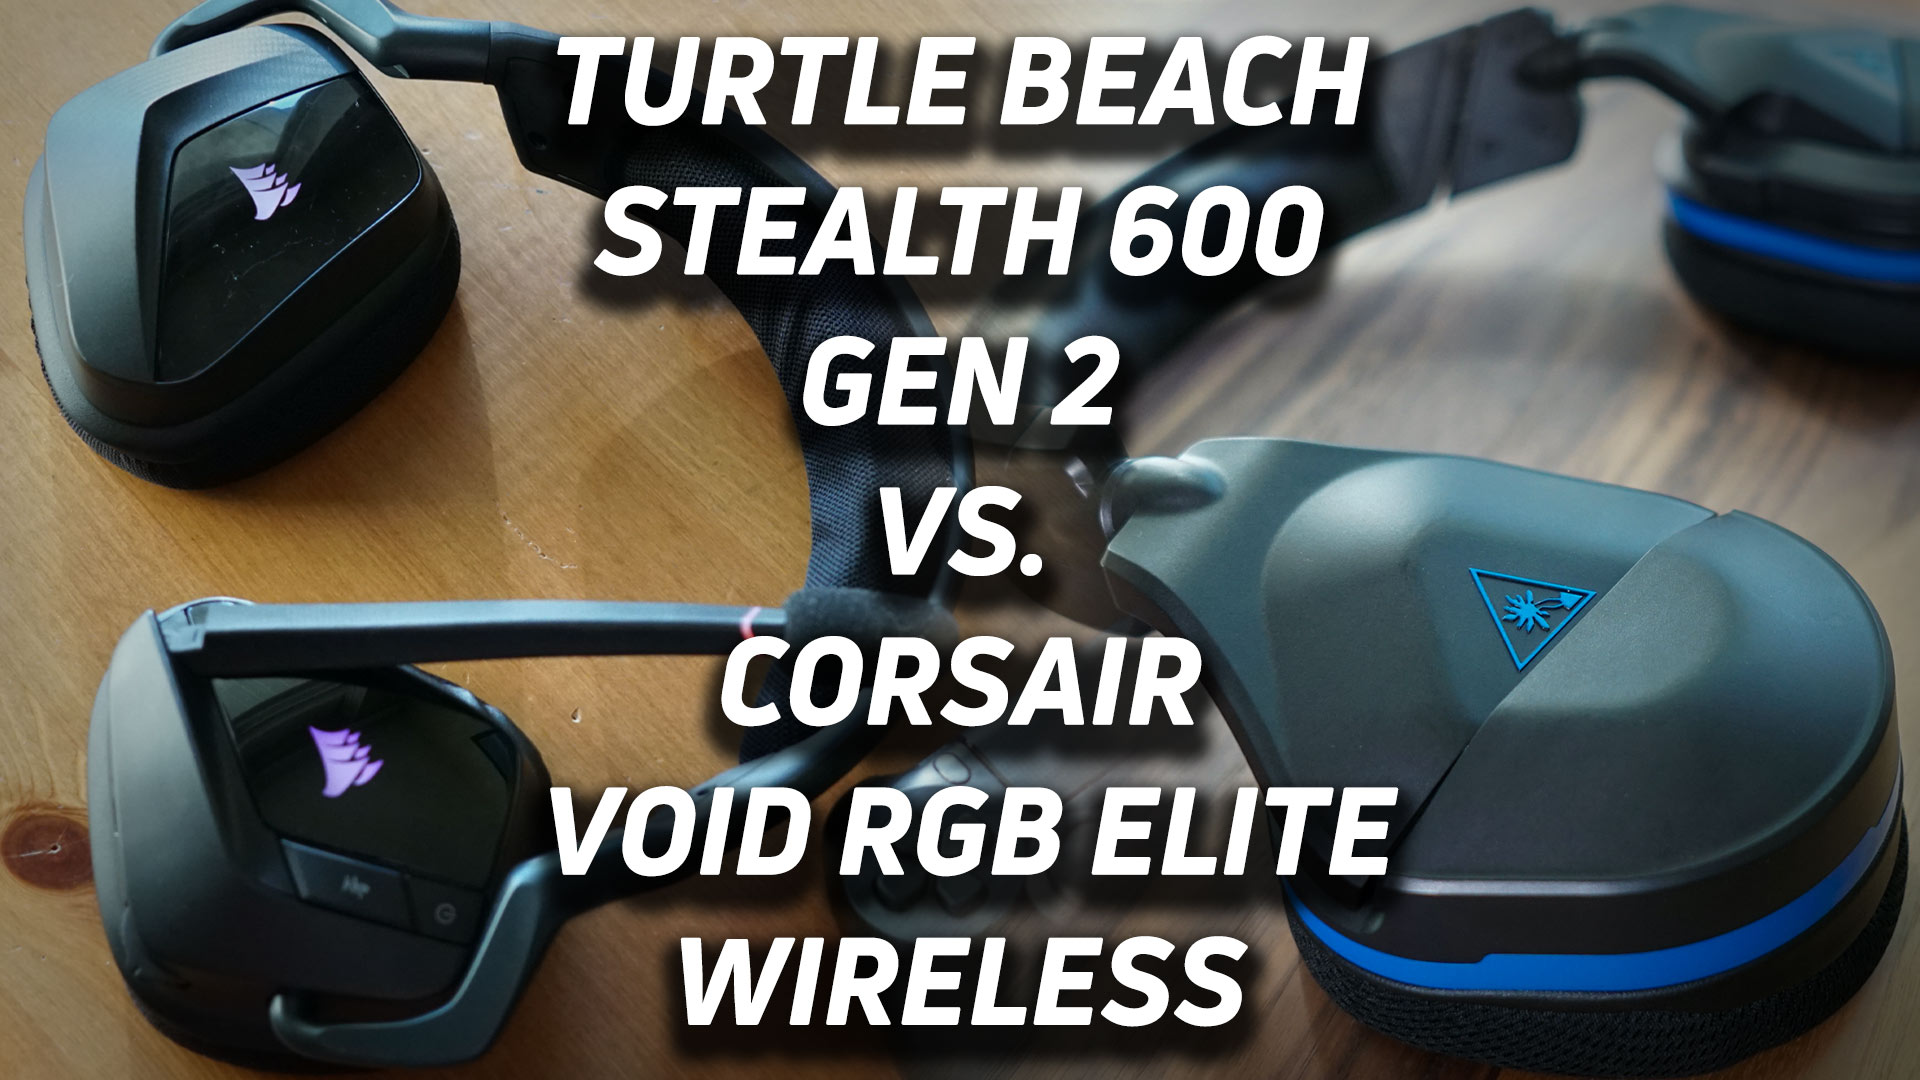 An blended image of the Turtle Beach Stealth 600 Gen 2 vs Corsair Void RGB Elite Wireless gaming headsets.